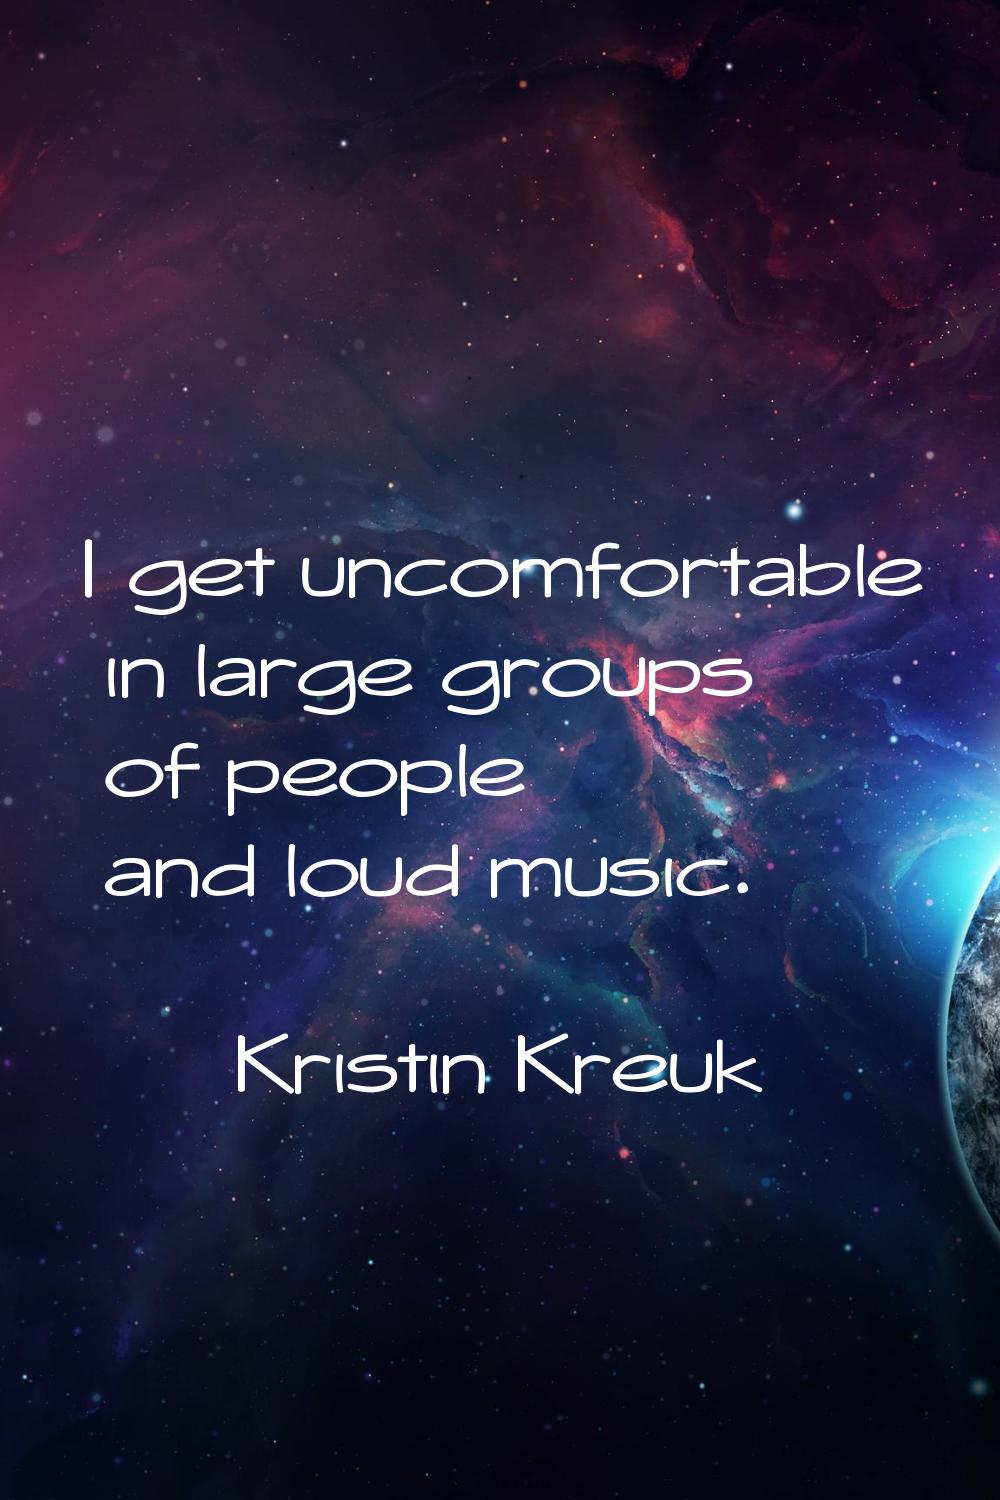 I get uncomfortable in large groups of people and loud music.